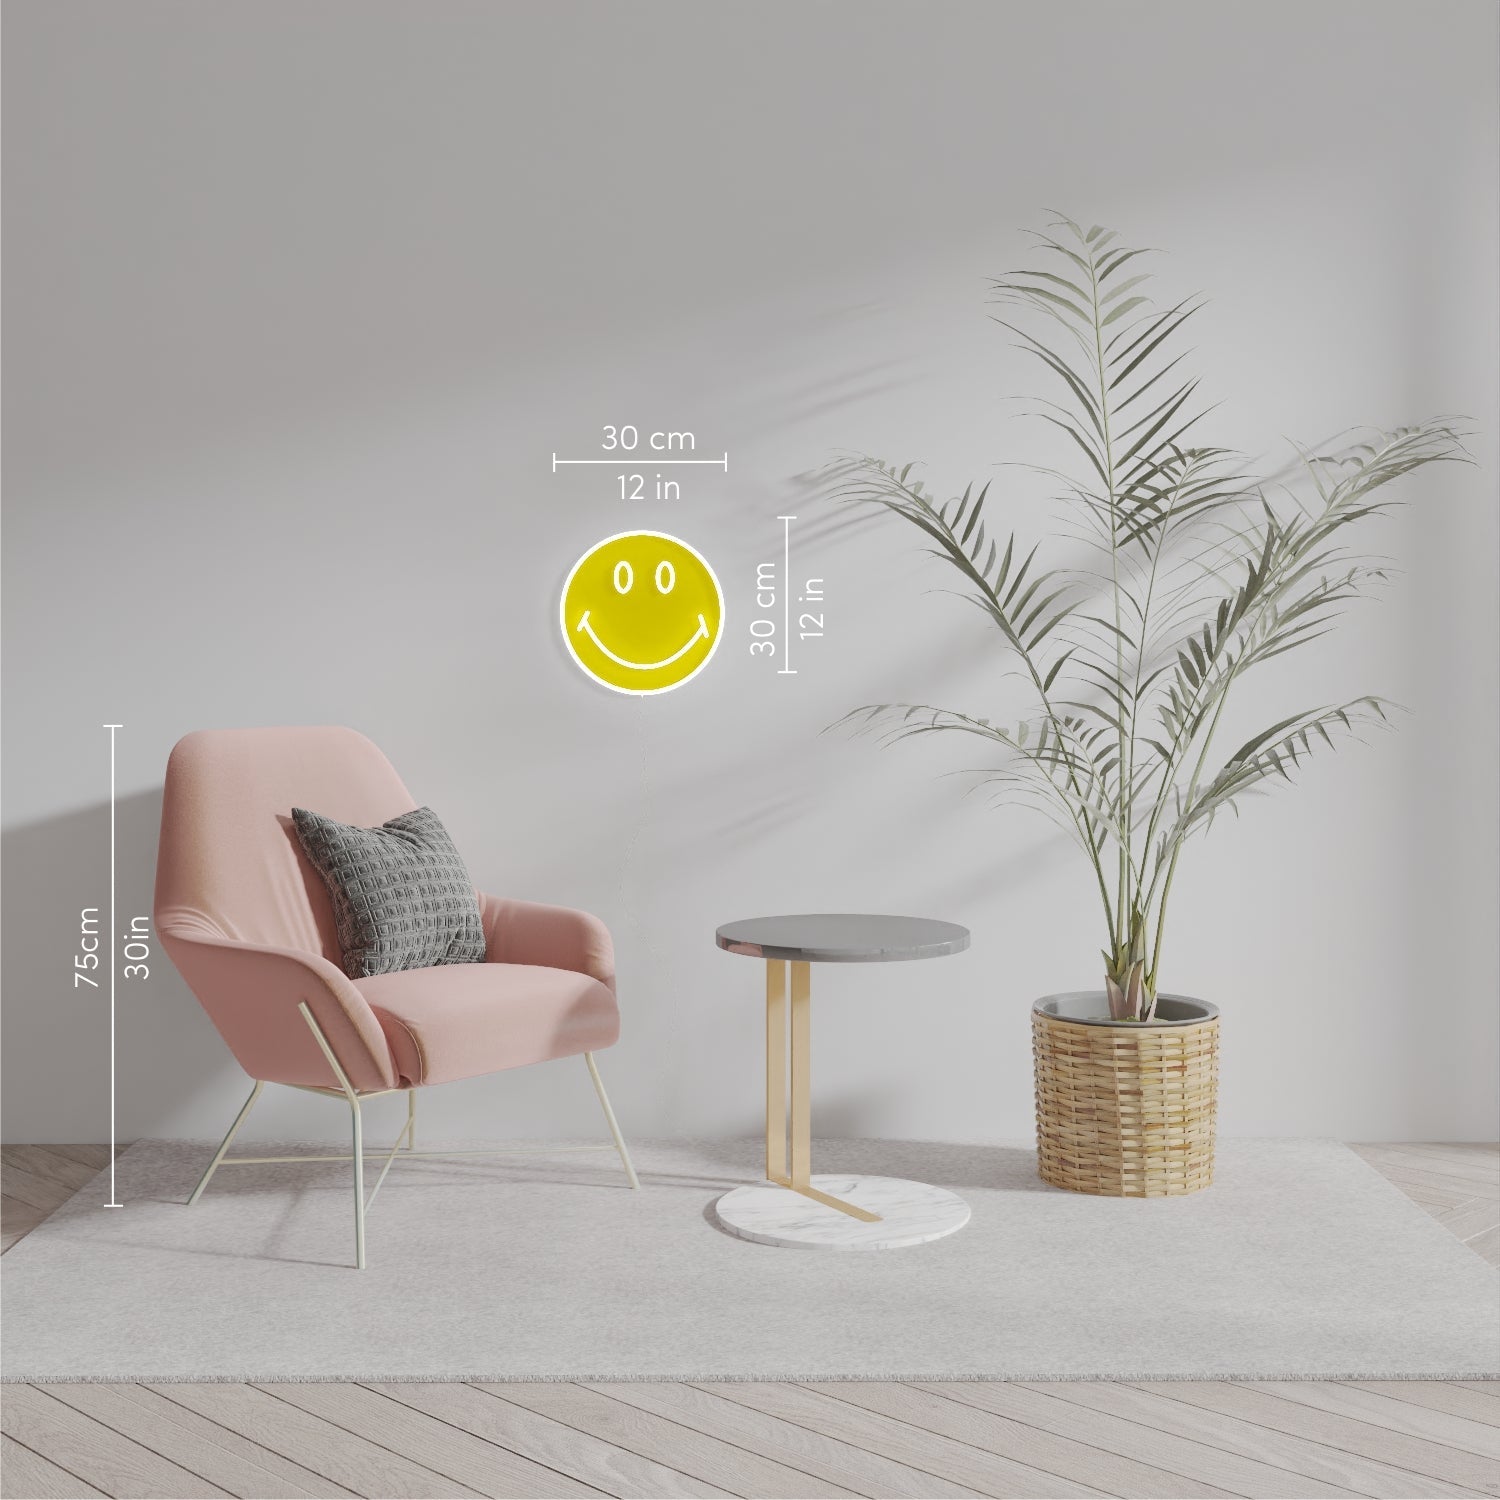 Smiley Classic by Smiley®, Neon Tabela - Neonbir